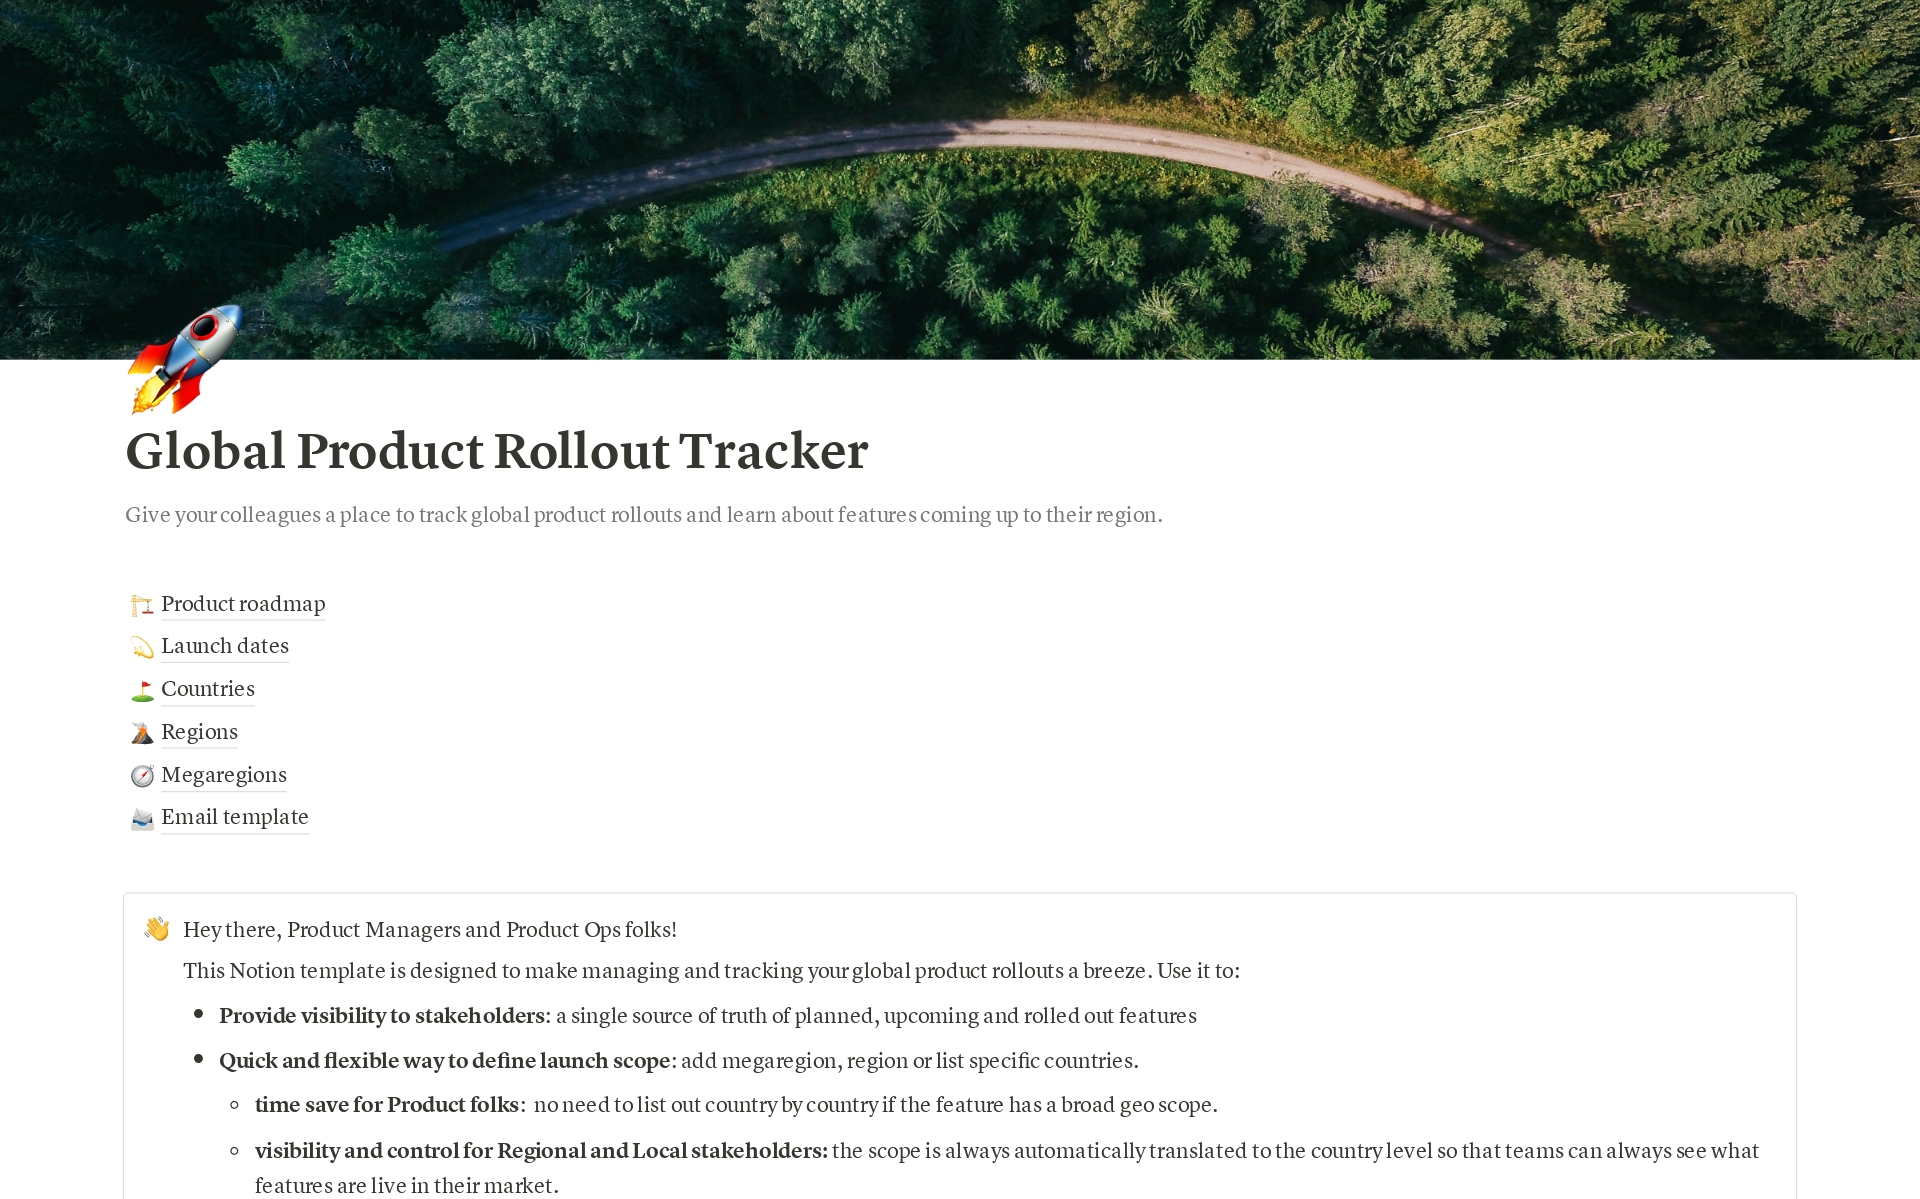 🎯 Manage, track and keep stakeholders updated on global product rollouts. Includes a list of all countries, regions and megaregions so you can quickly define the right scope for the launch. 
👩🏻‍💻 Designed for Product Managers and Product Ops in tech companies